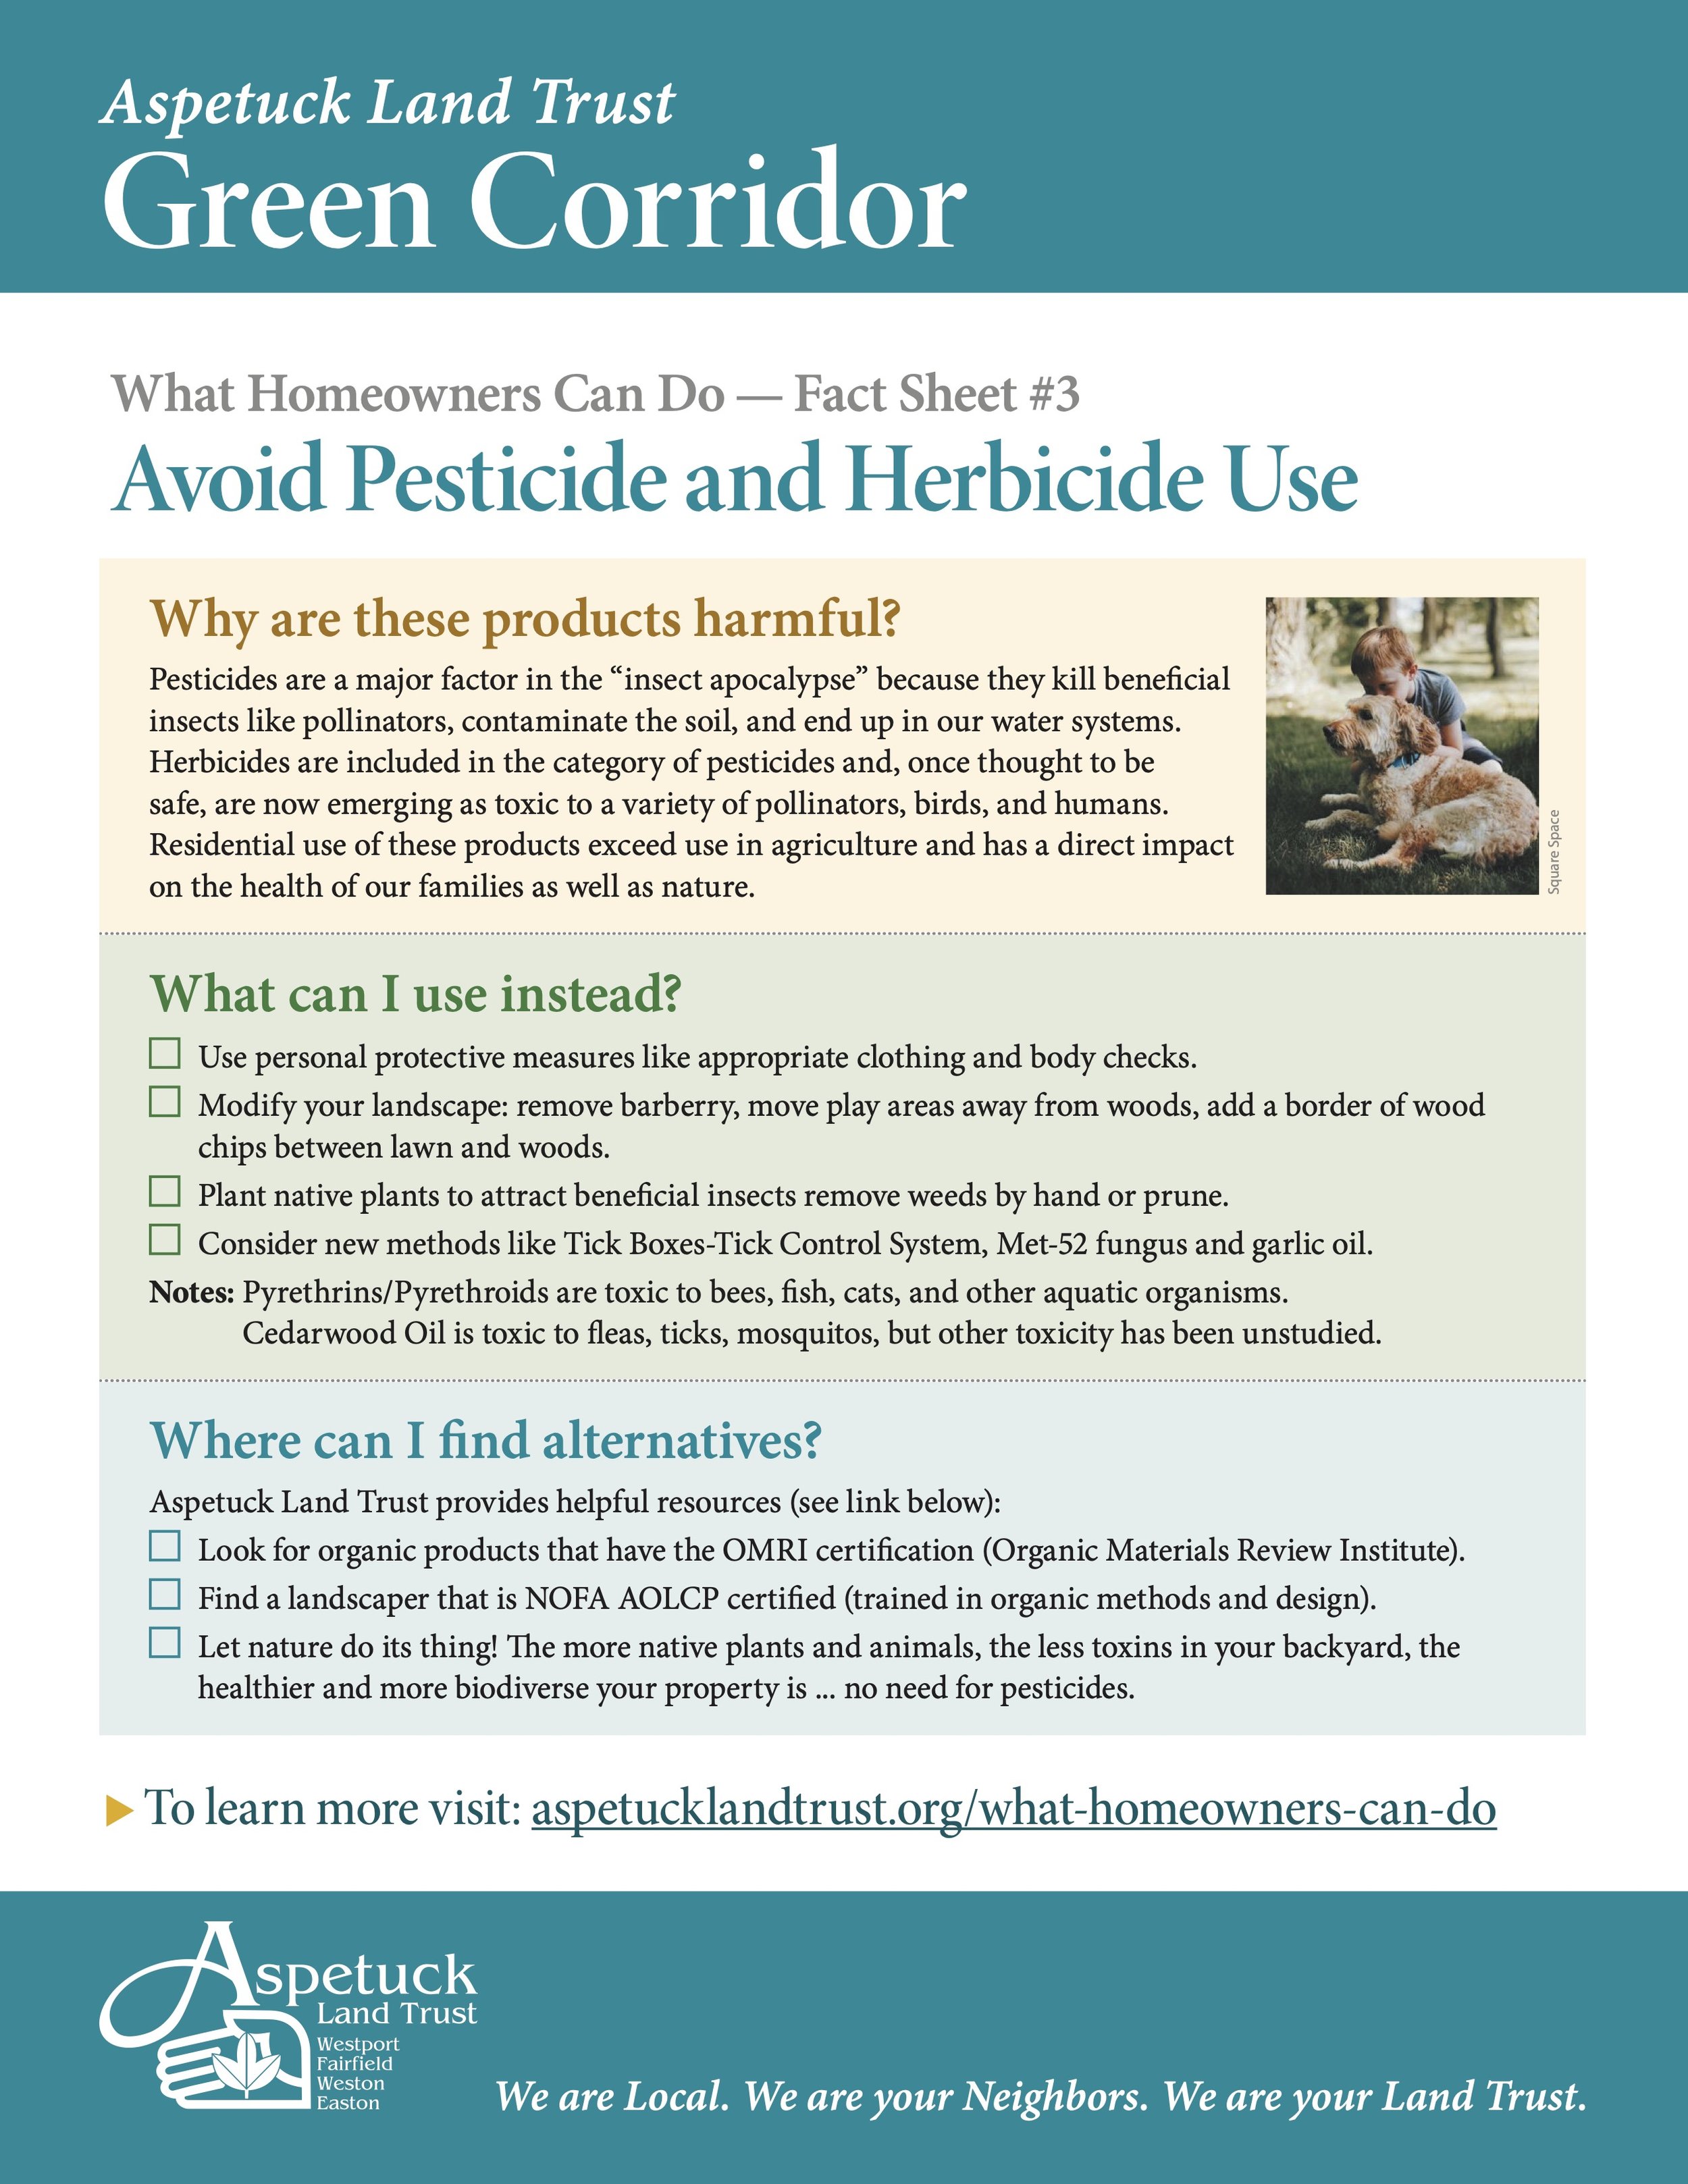 Avoid Pesticides and Herbicides